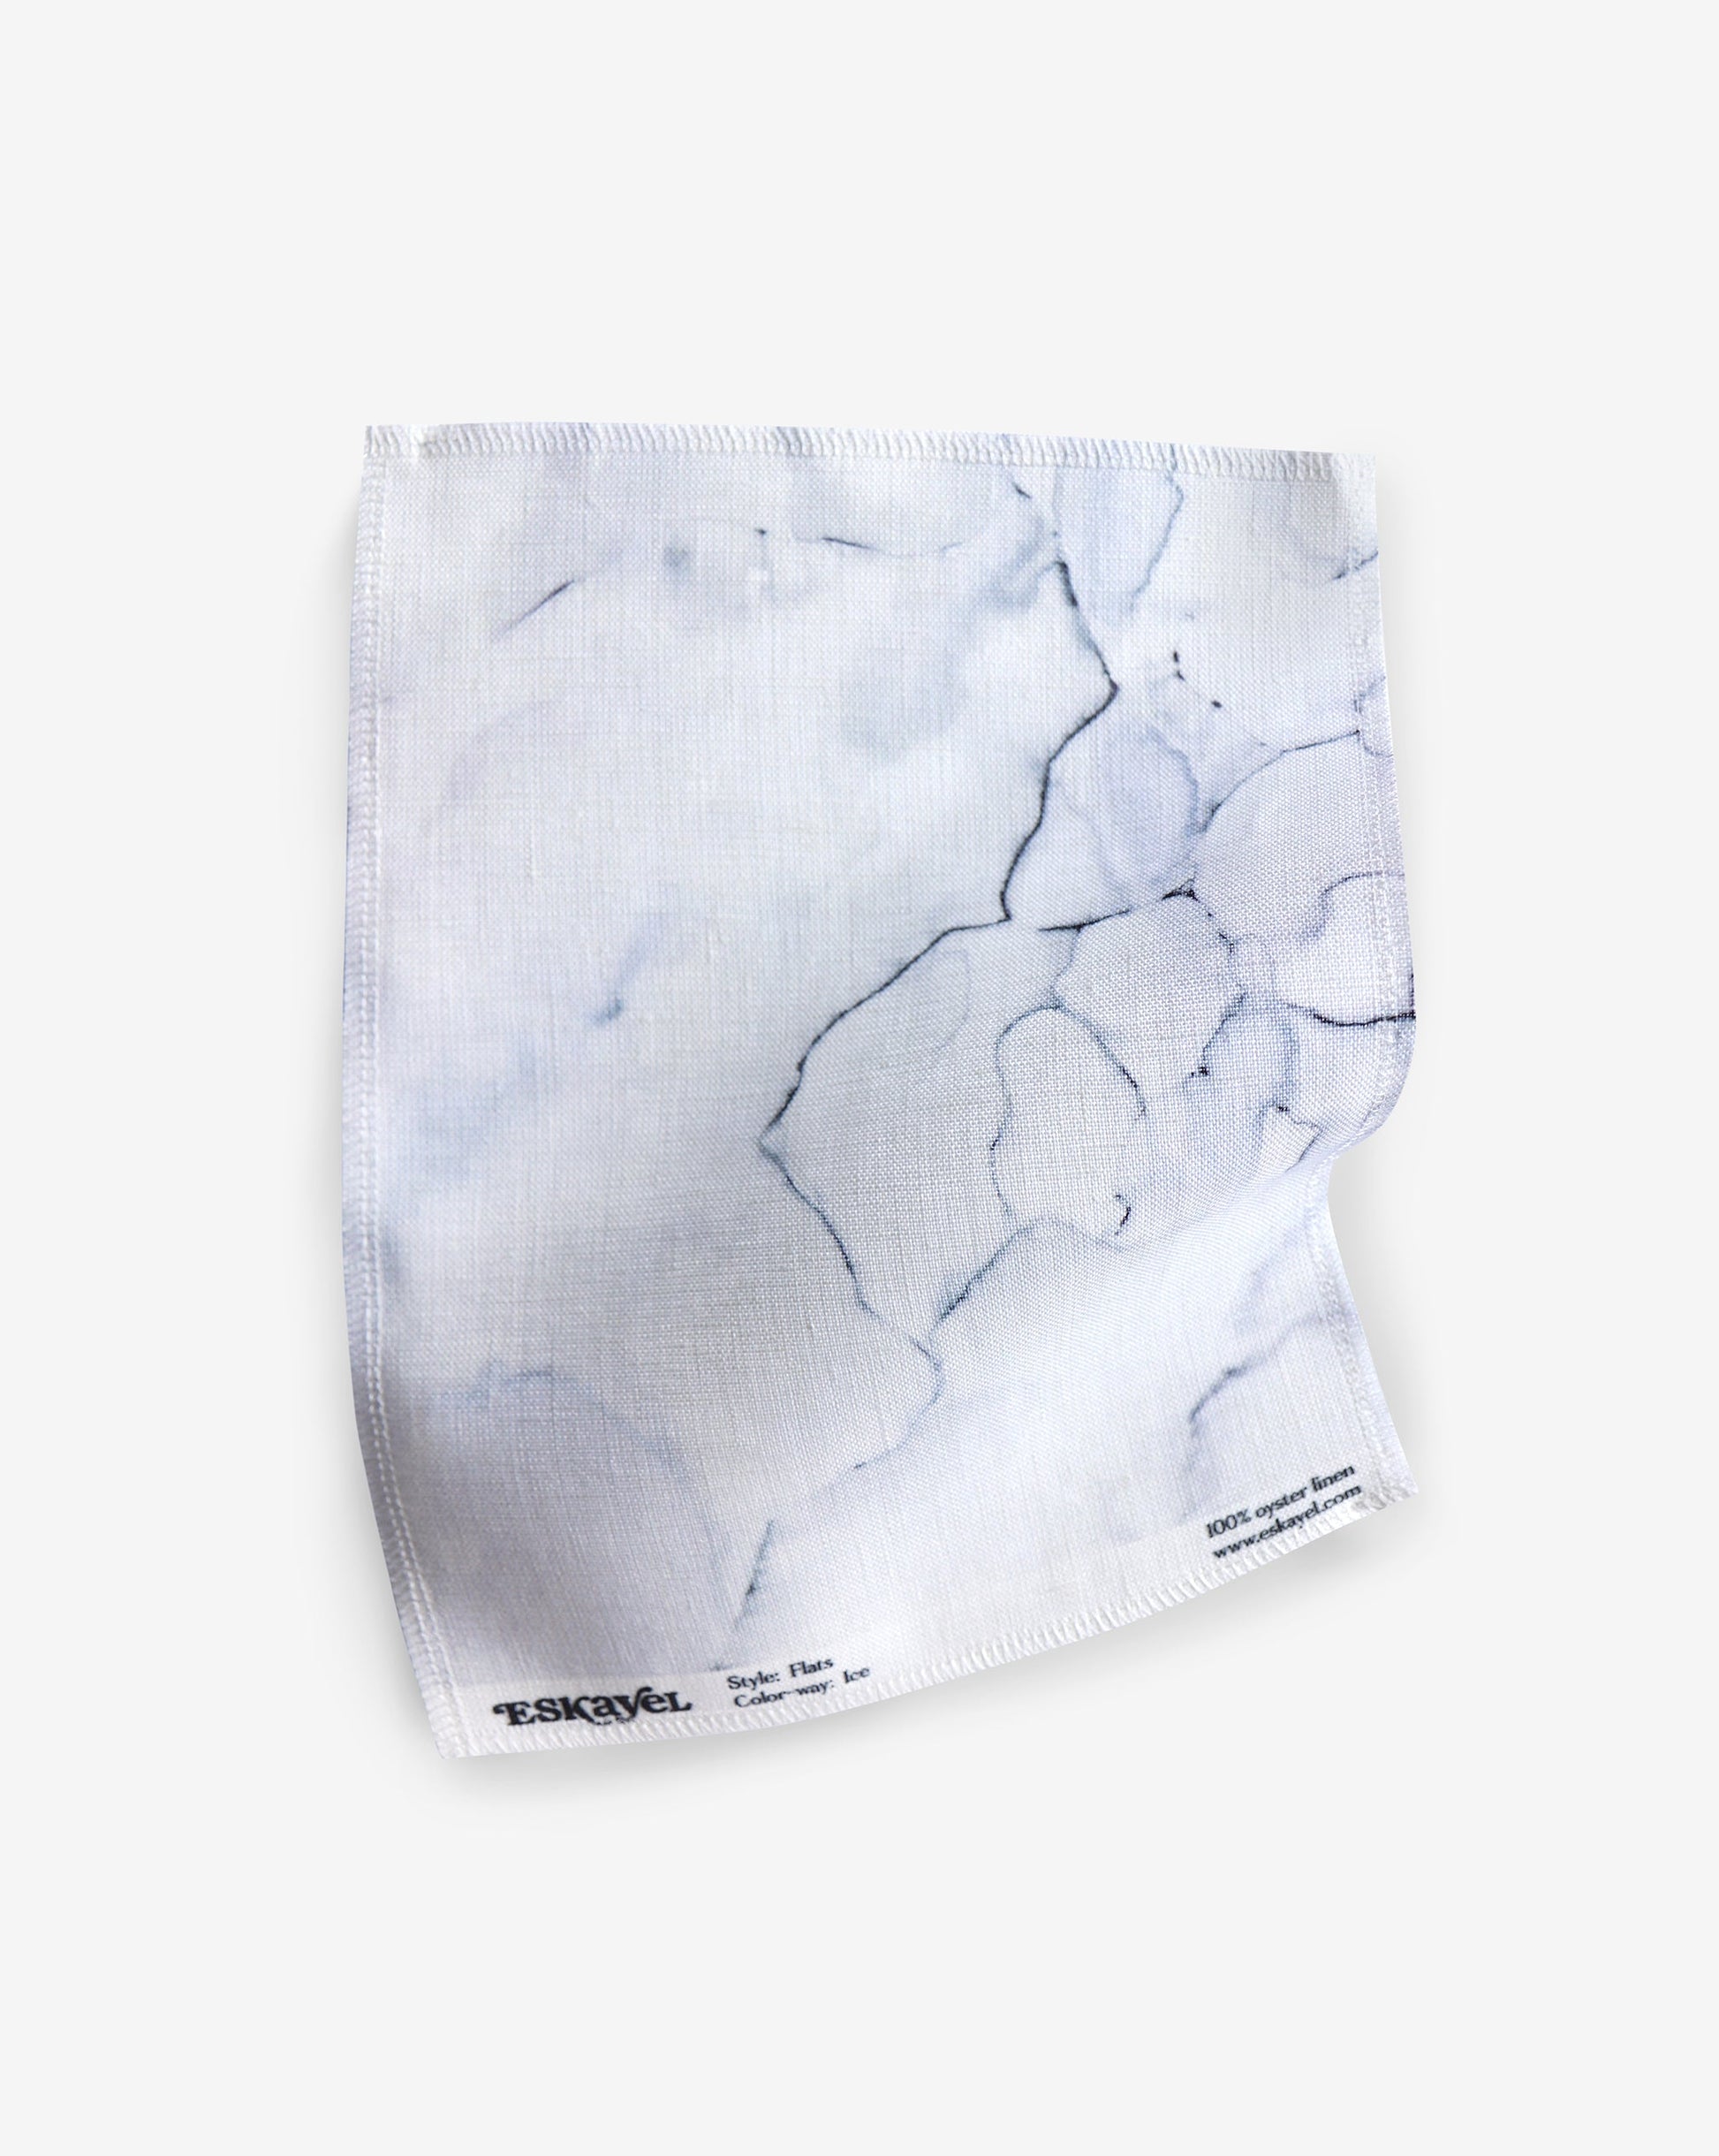 A white fabric made of Aquarelle Fabric with a marble pattern on it